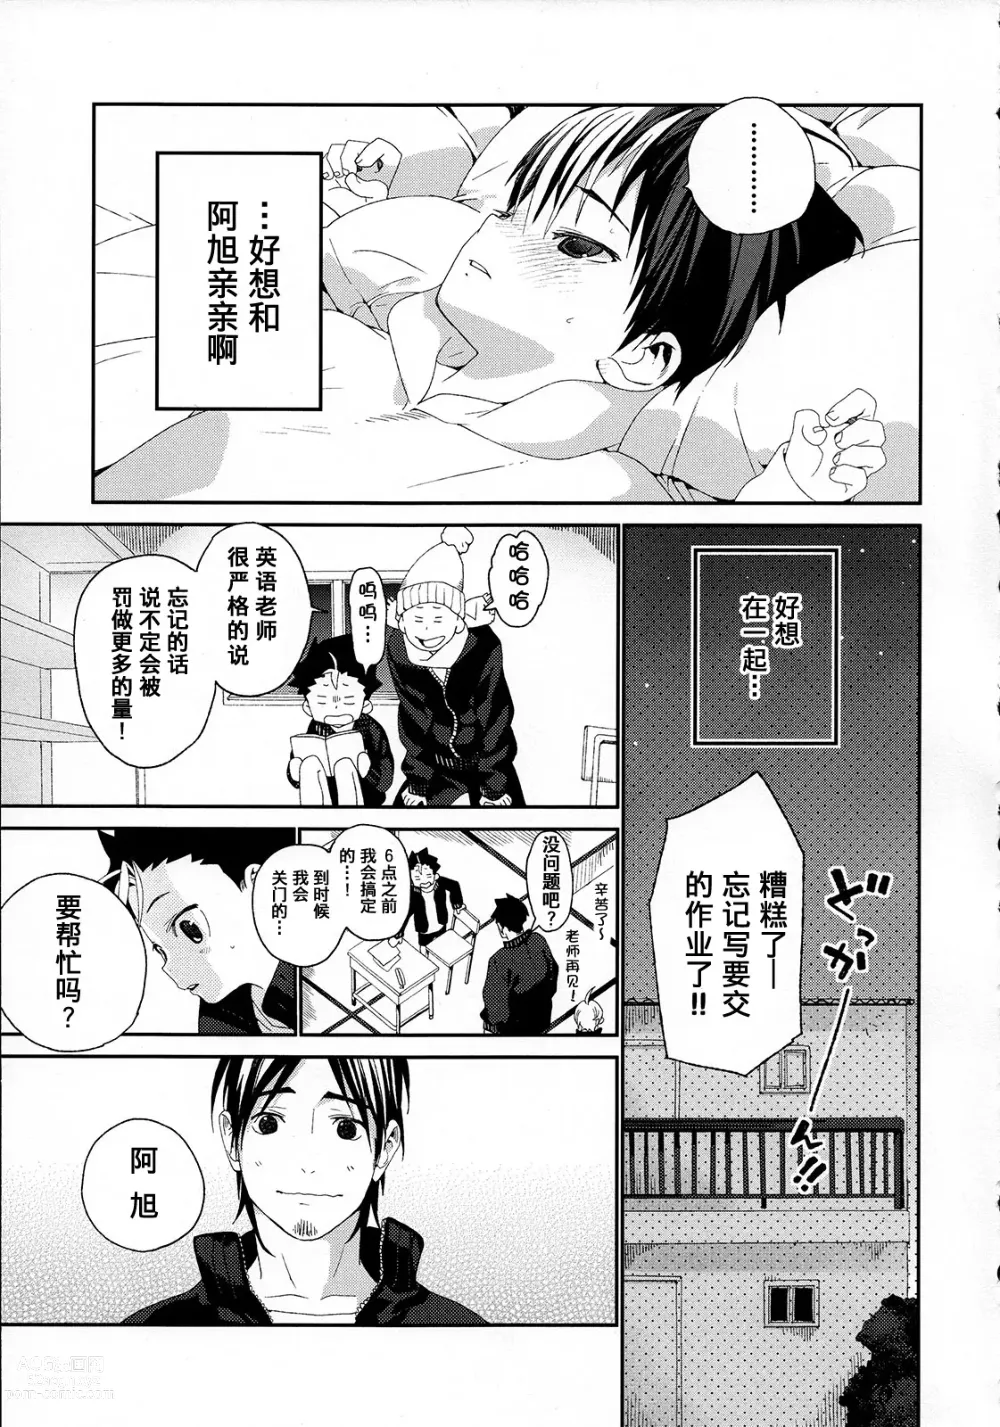 Page 31 of doujinshi 西谷君的发情期